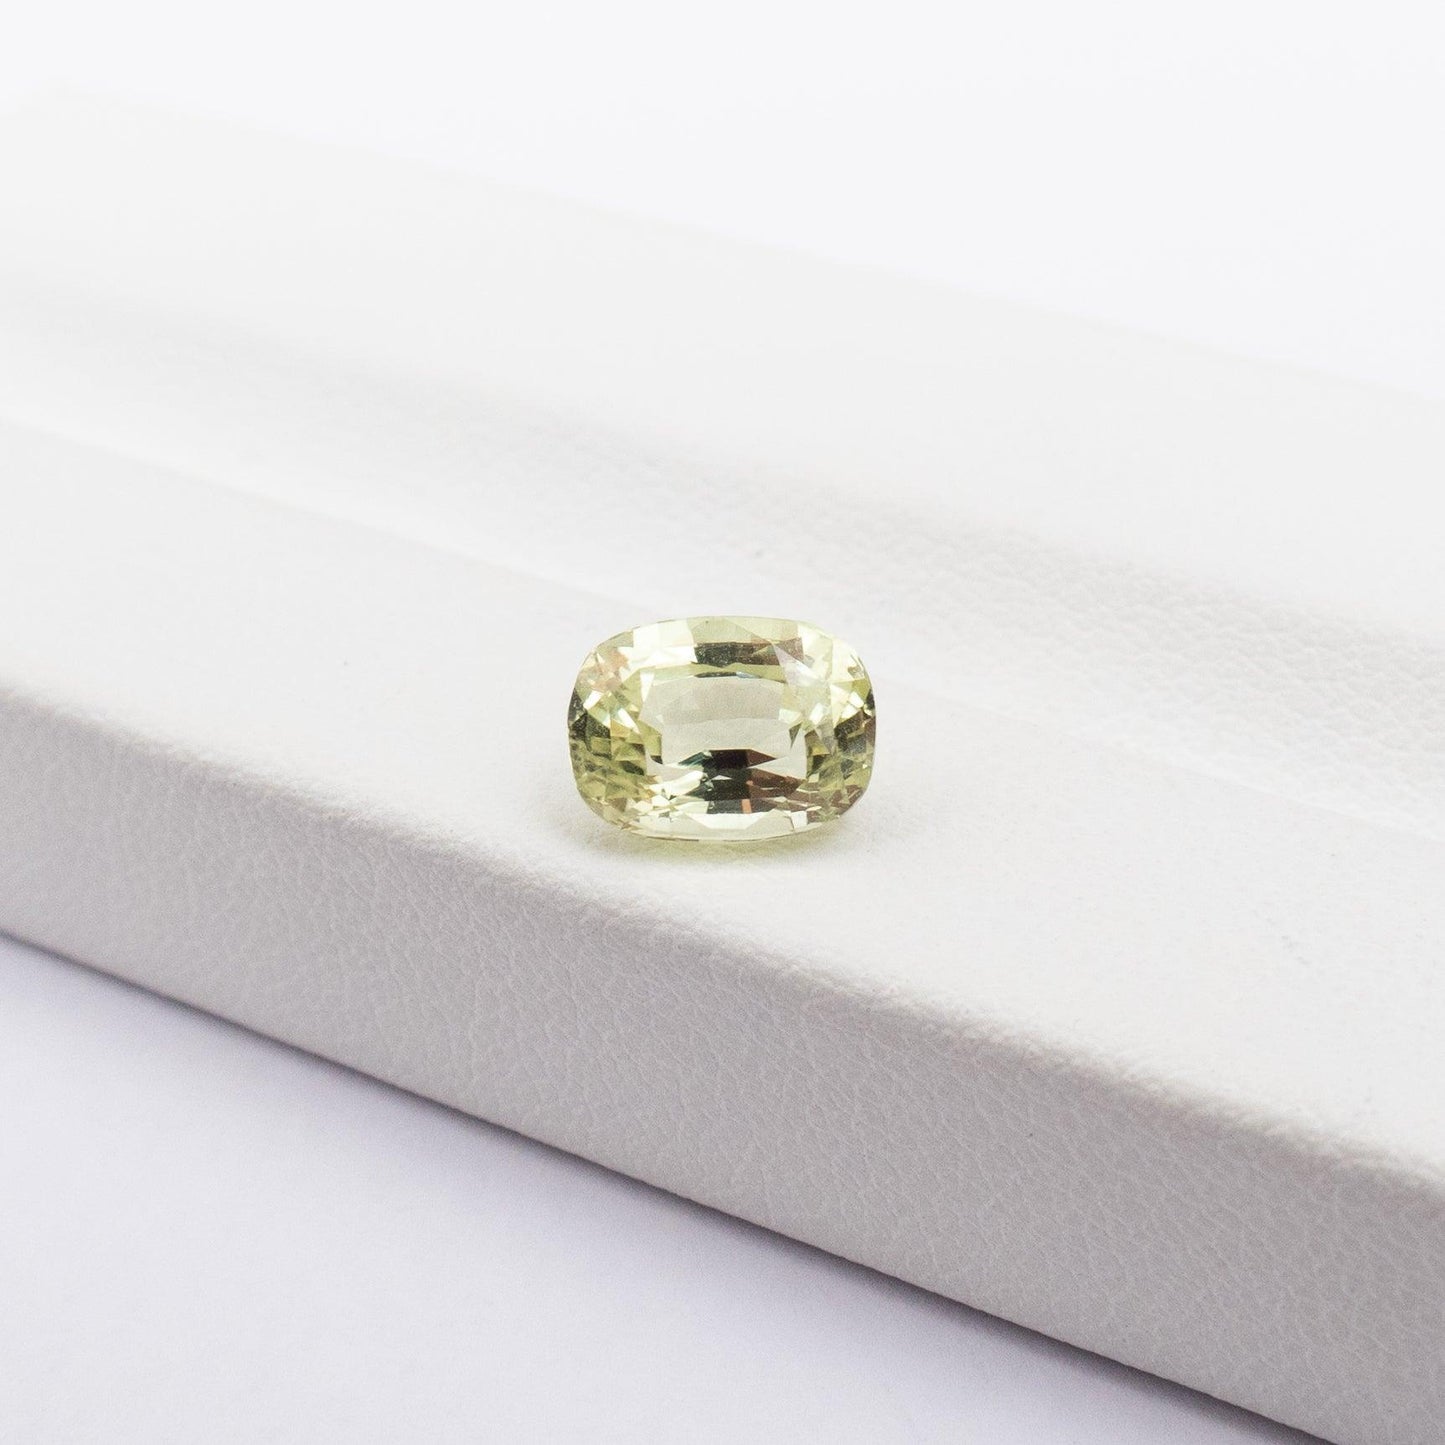 Chrysoberyl Natural 2.07ct - The Colored Stone Co.